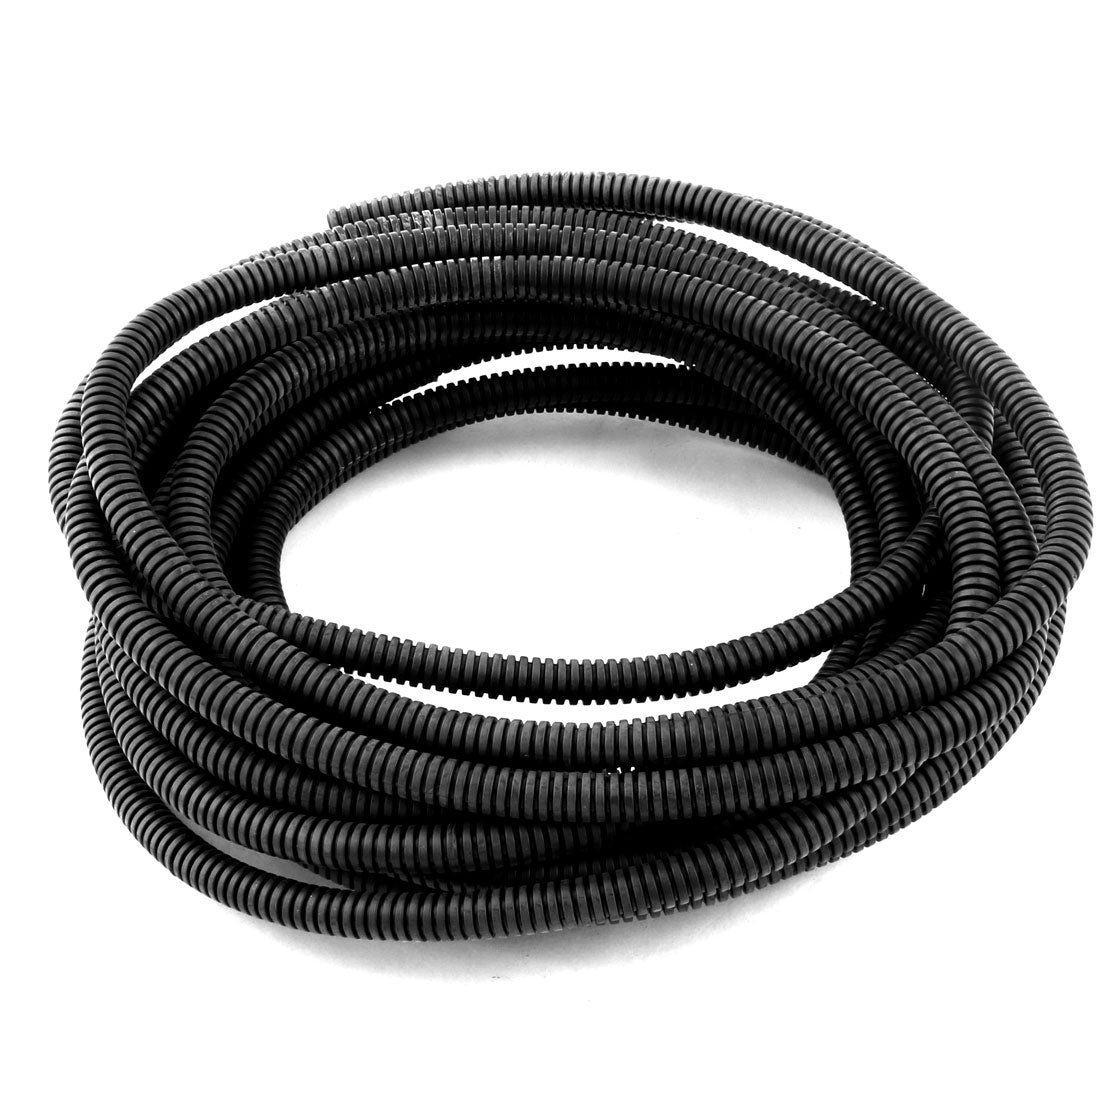 uxcell Uxcell 8 M 7 x 10 mm Plastic Flexible Corrugated Conduit Tube for Garden,Office Black